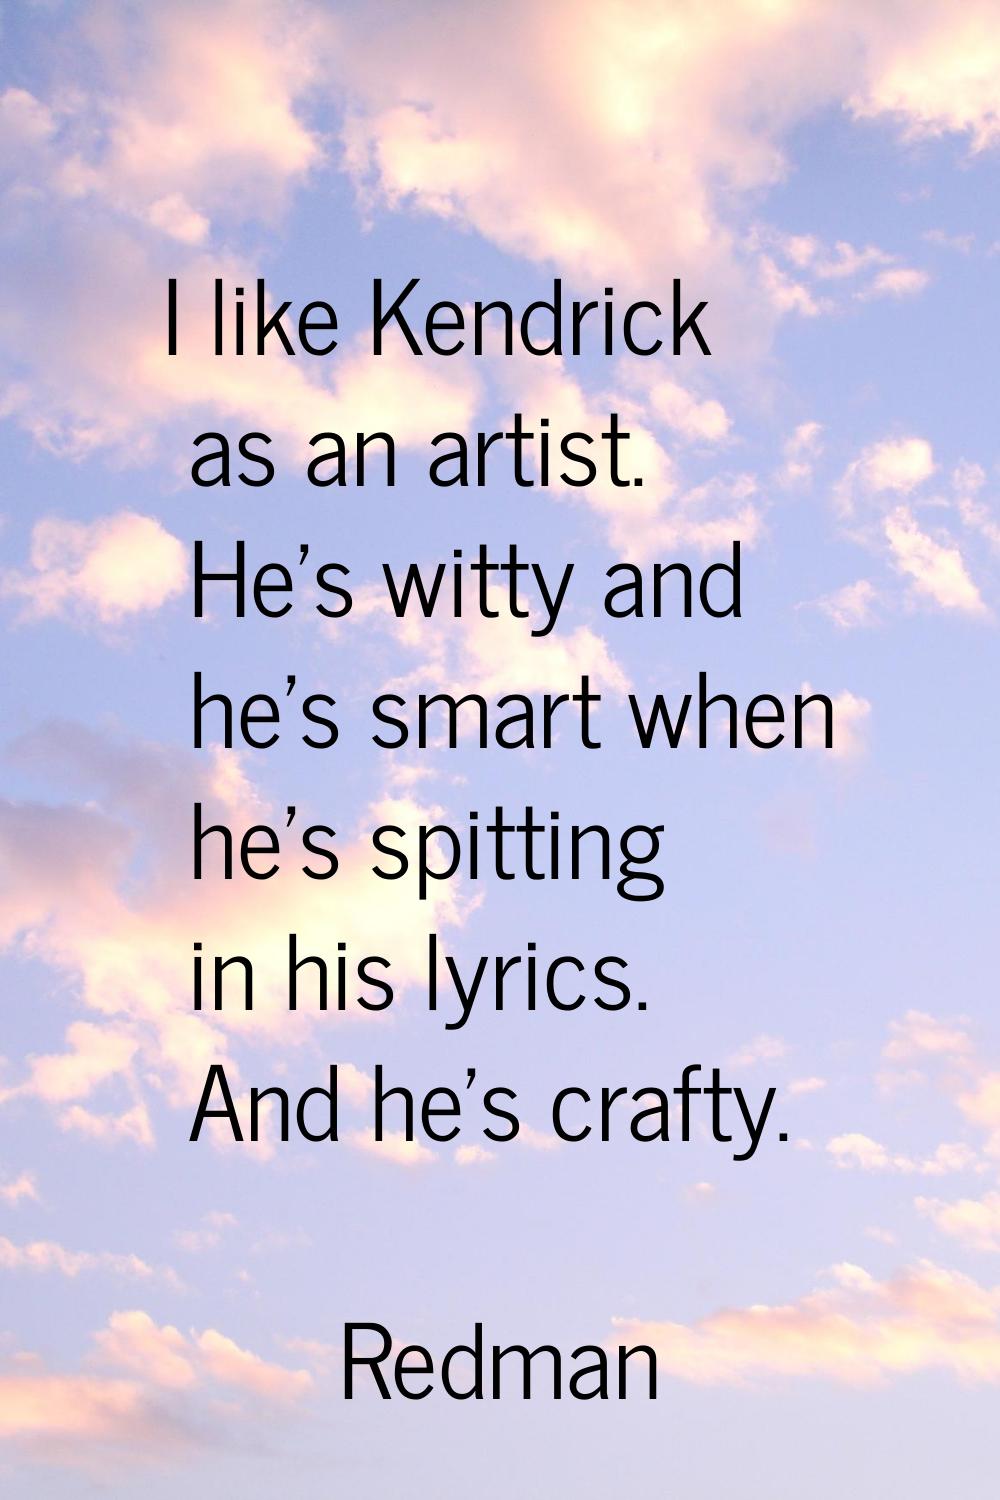 I like Kendrick as an artist. He's witty and he's smart when he's spitting in his lyrics. And he's 